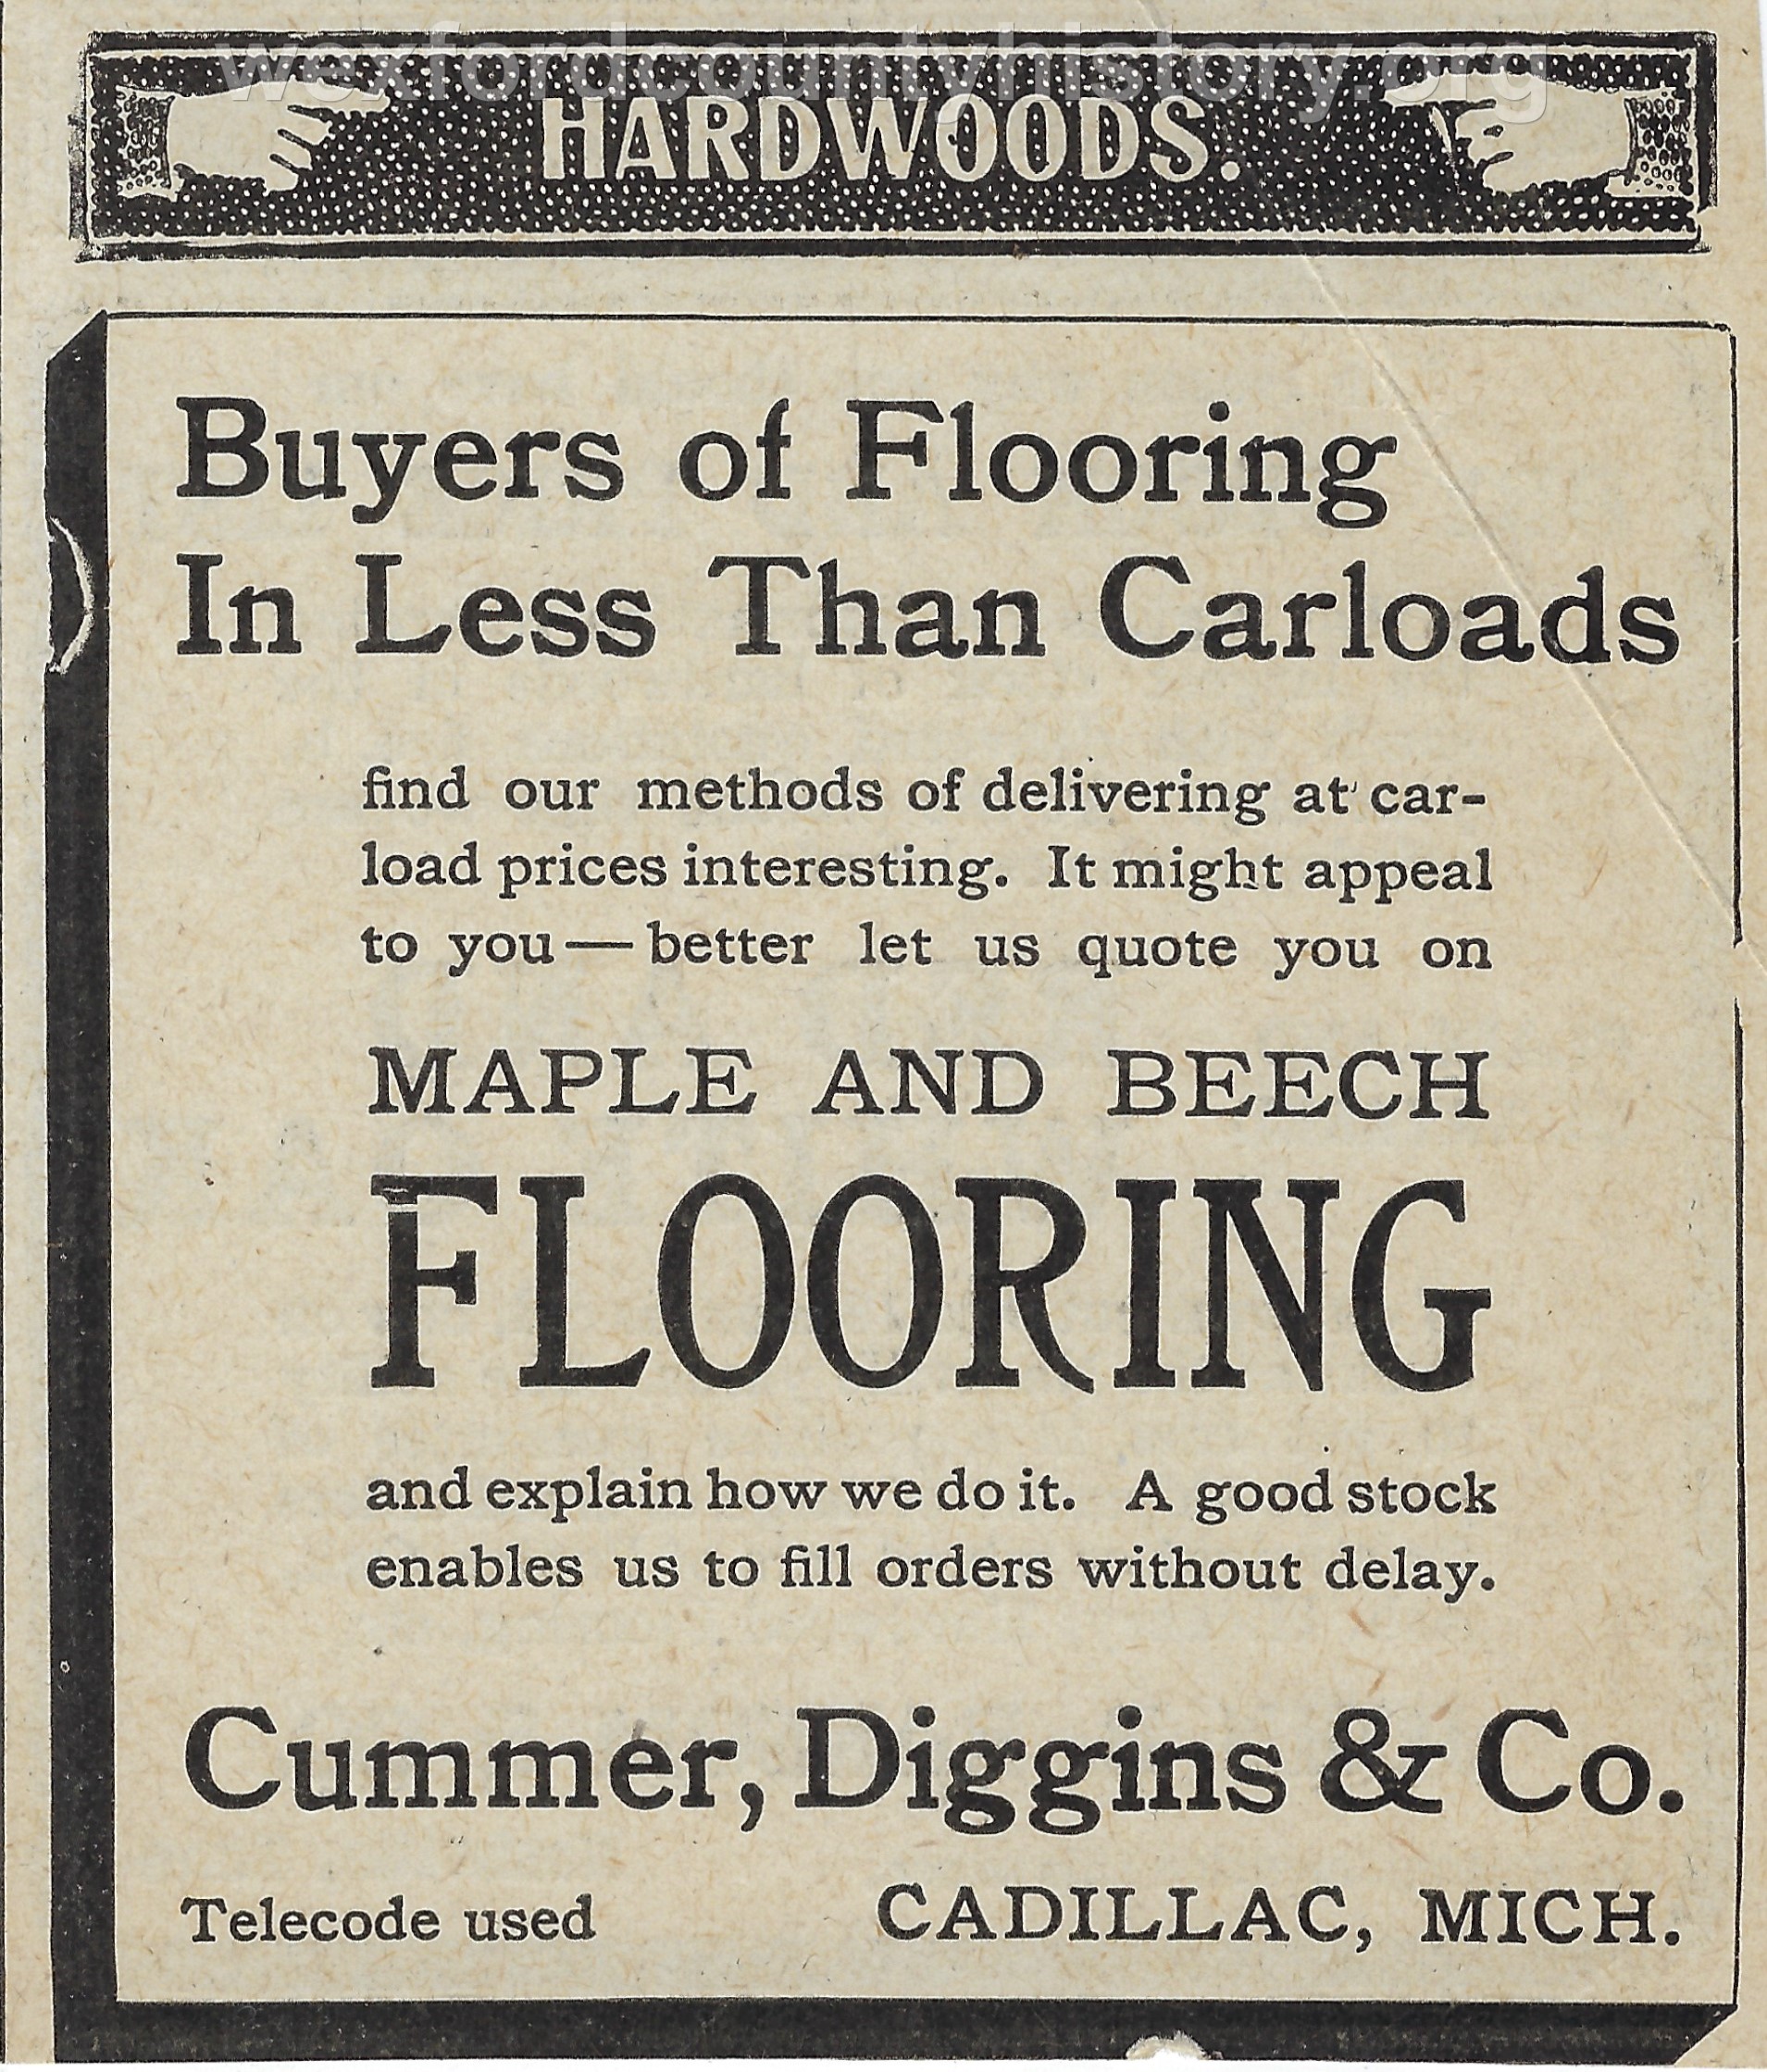 Cadillac-Business-Cobbs-And-Mitchell-Electric-Flooring-Plant-1